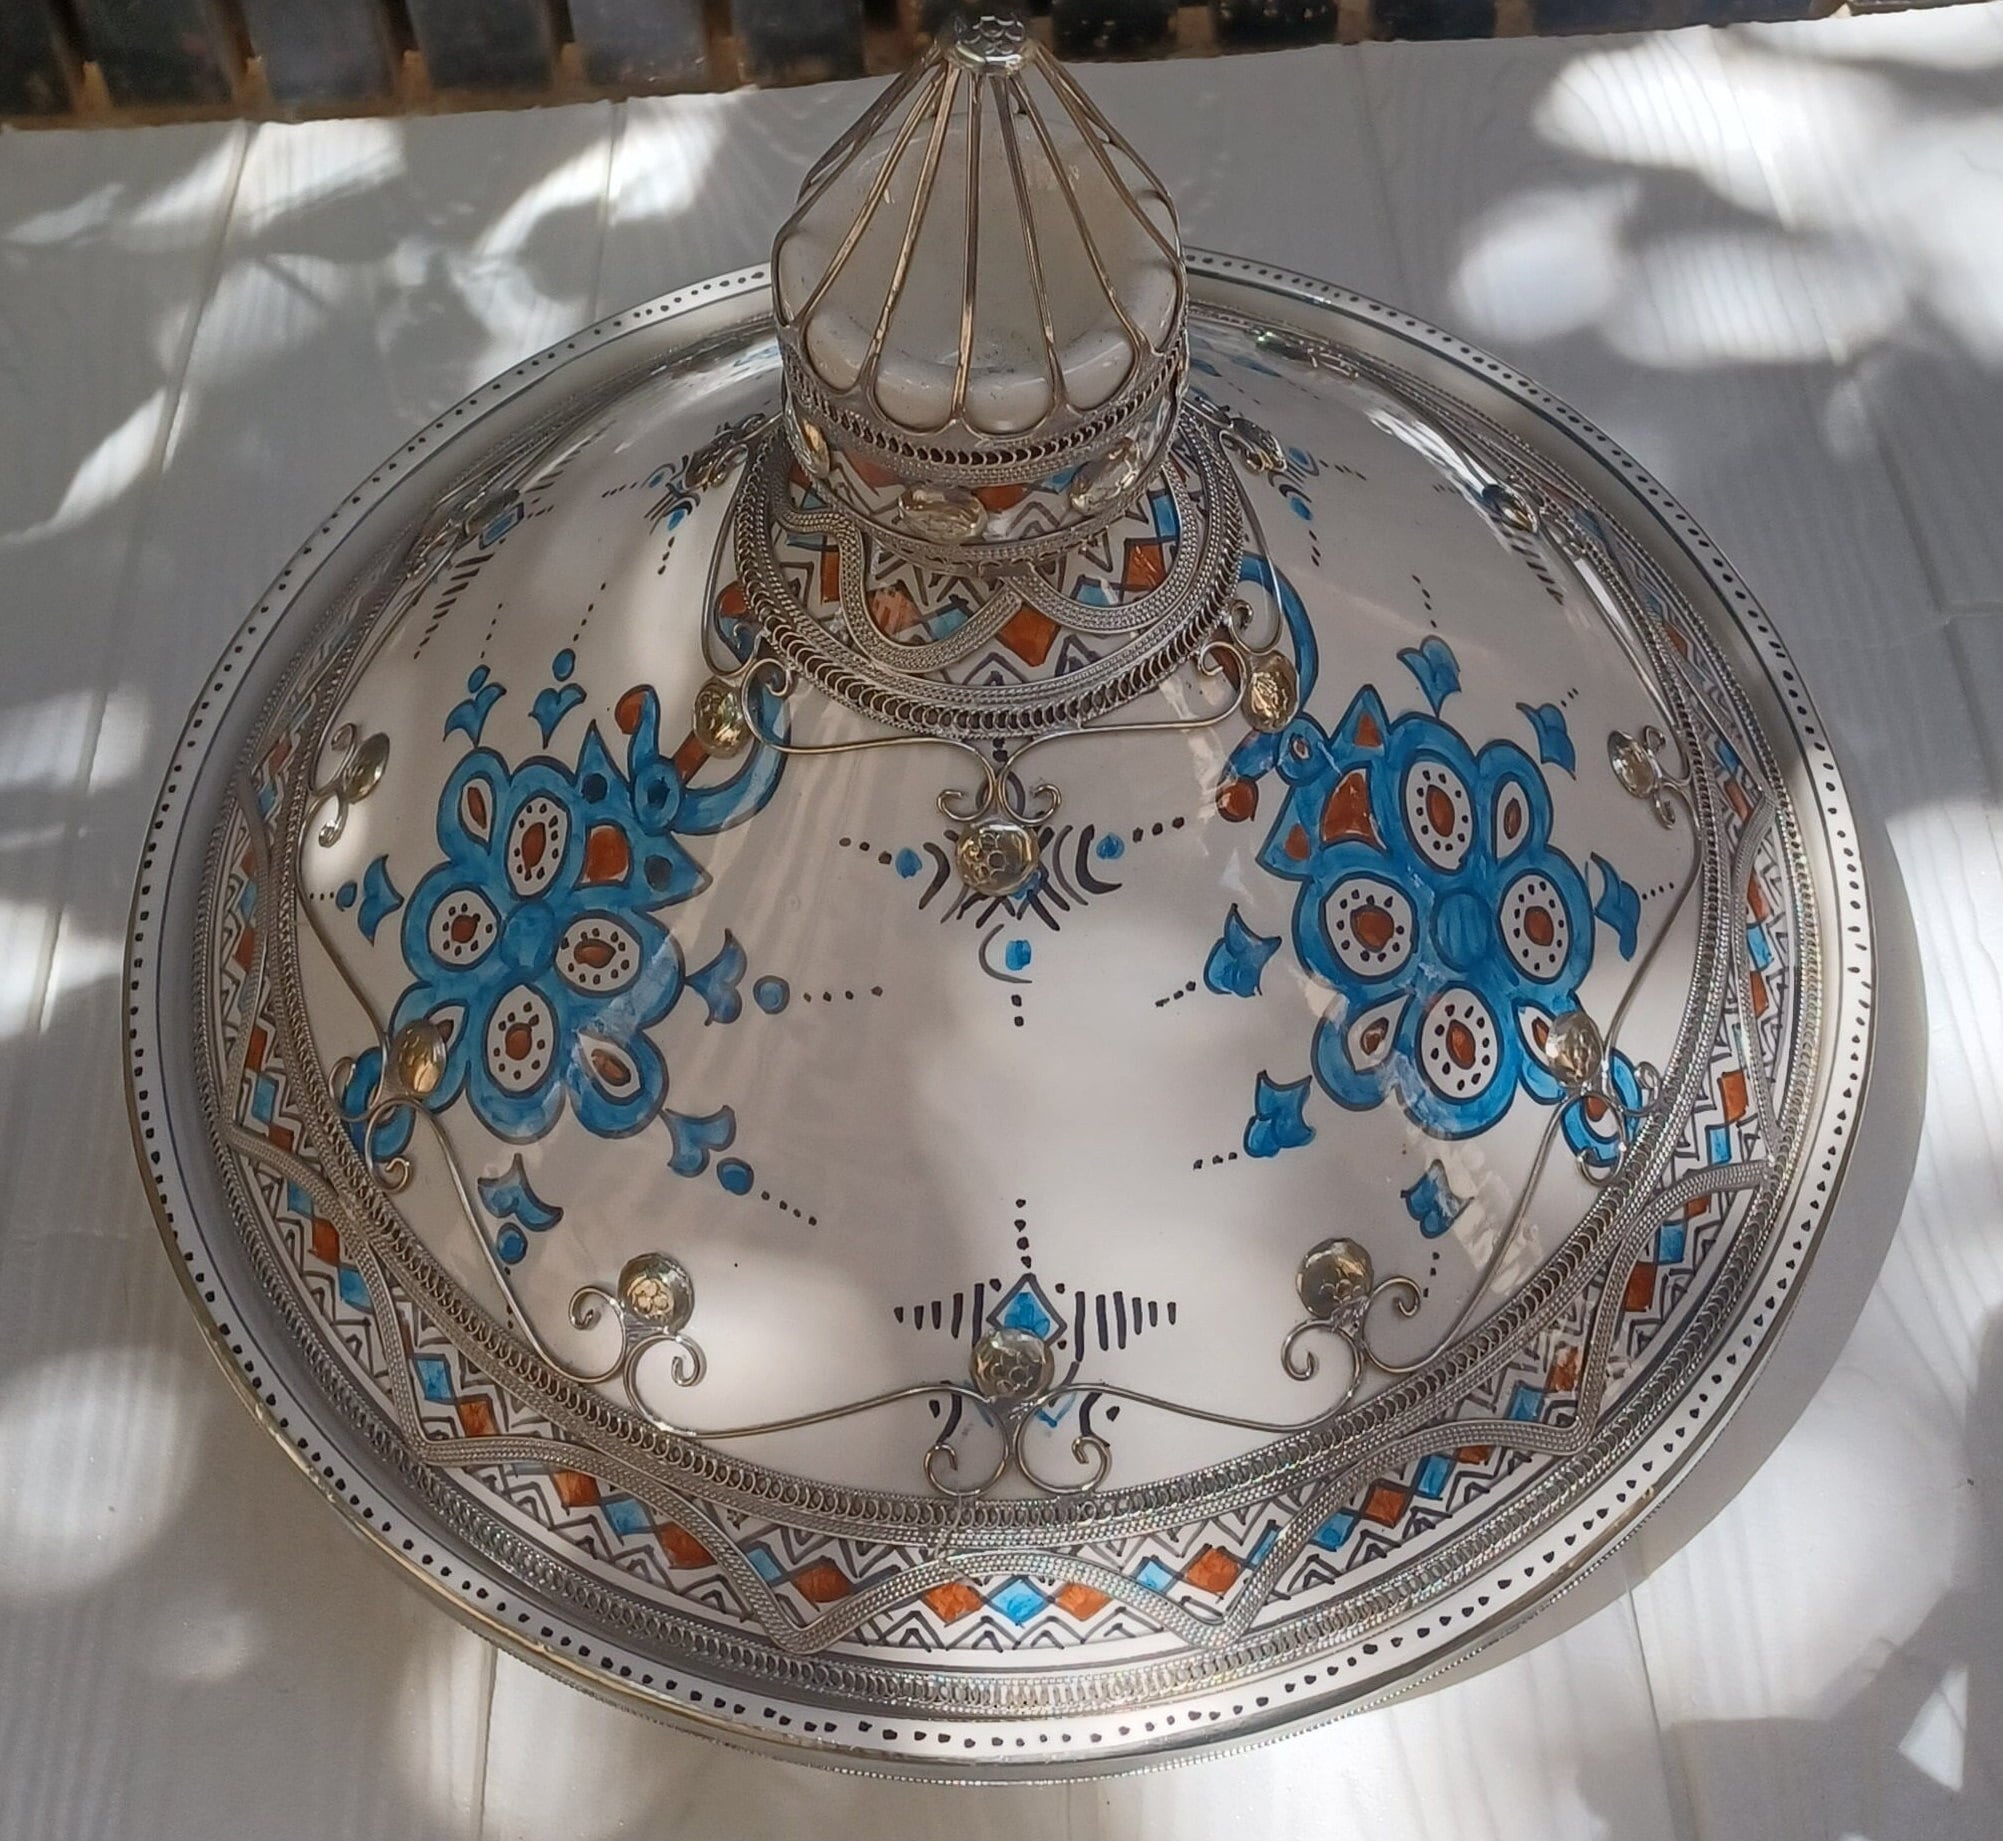 official Moroccan Ceramic Tagine with Nickel Silver Inlays-Original Ceramic  Tagine-Berber Serving Plate-Pottery Tagine-Hand Decorated Tagine-ArtsFez